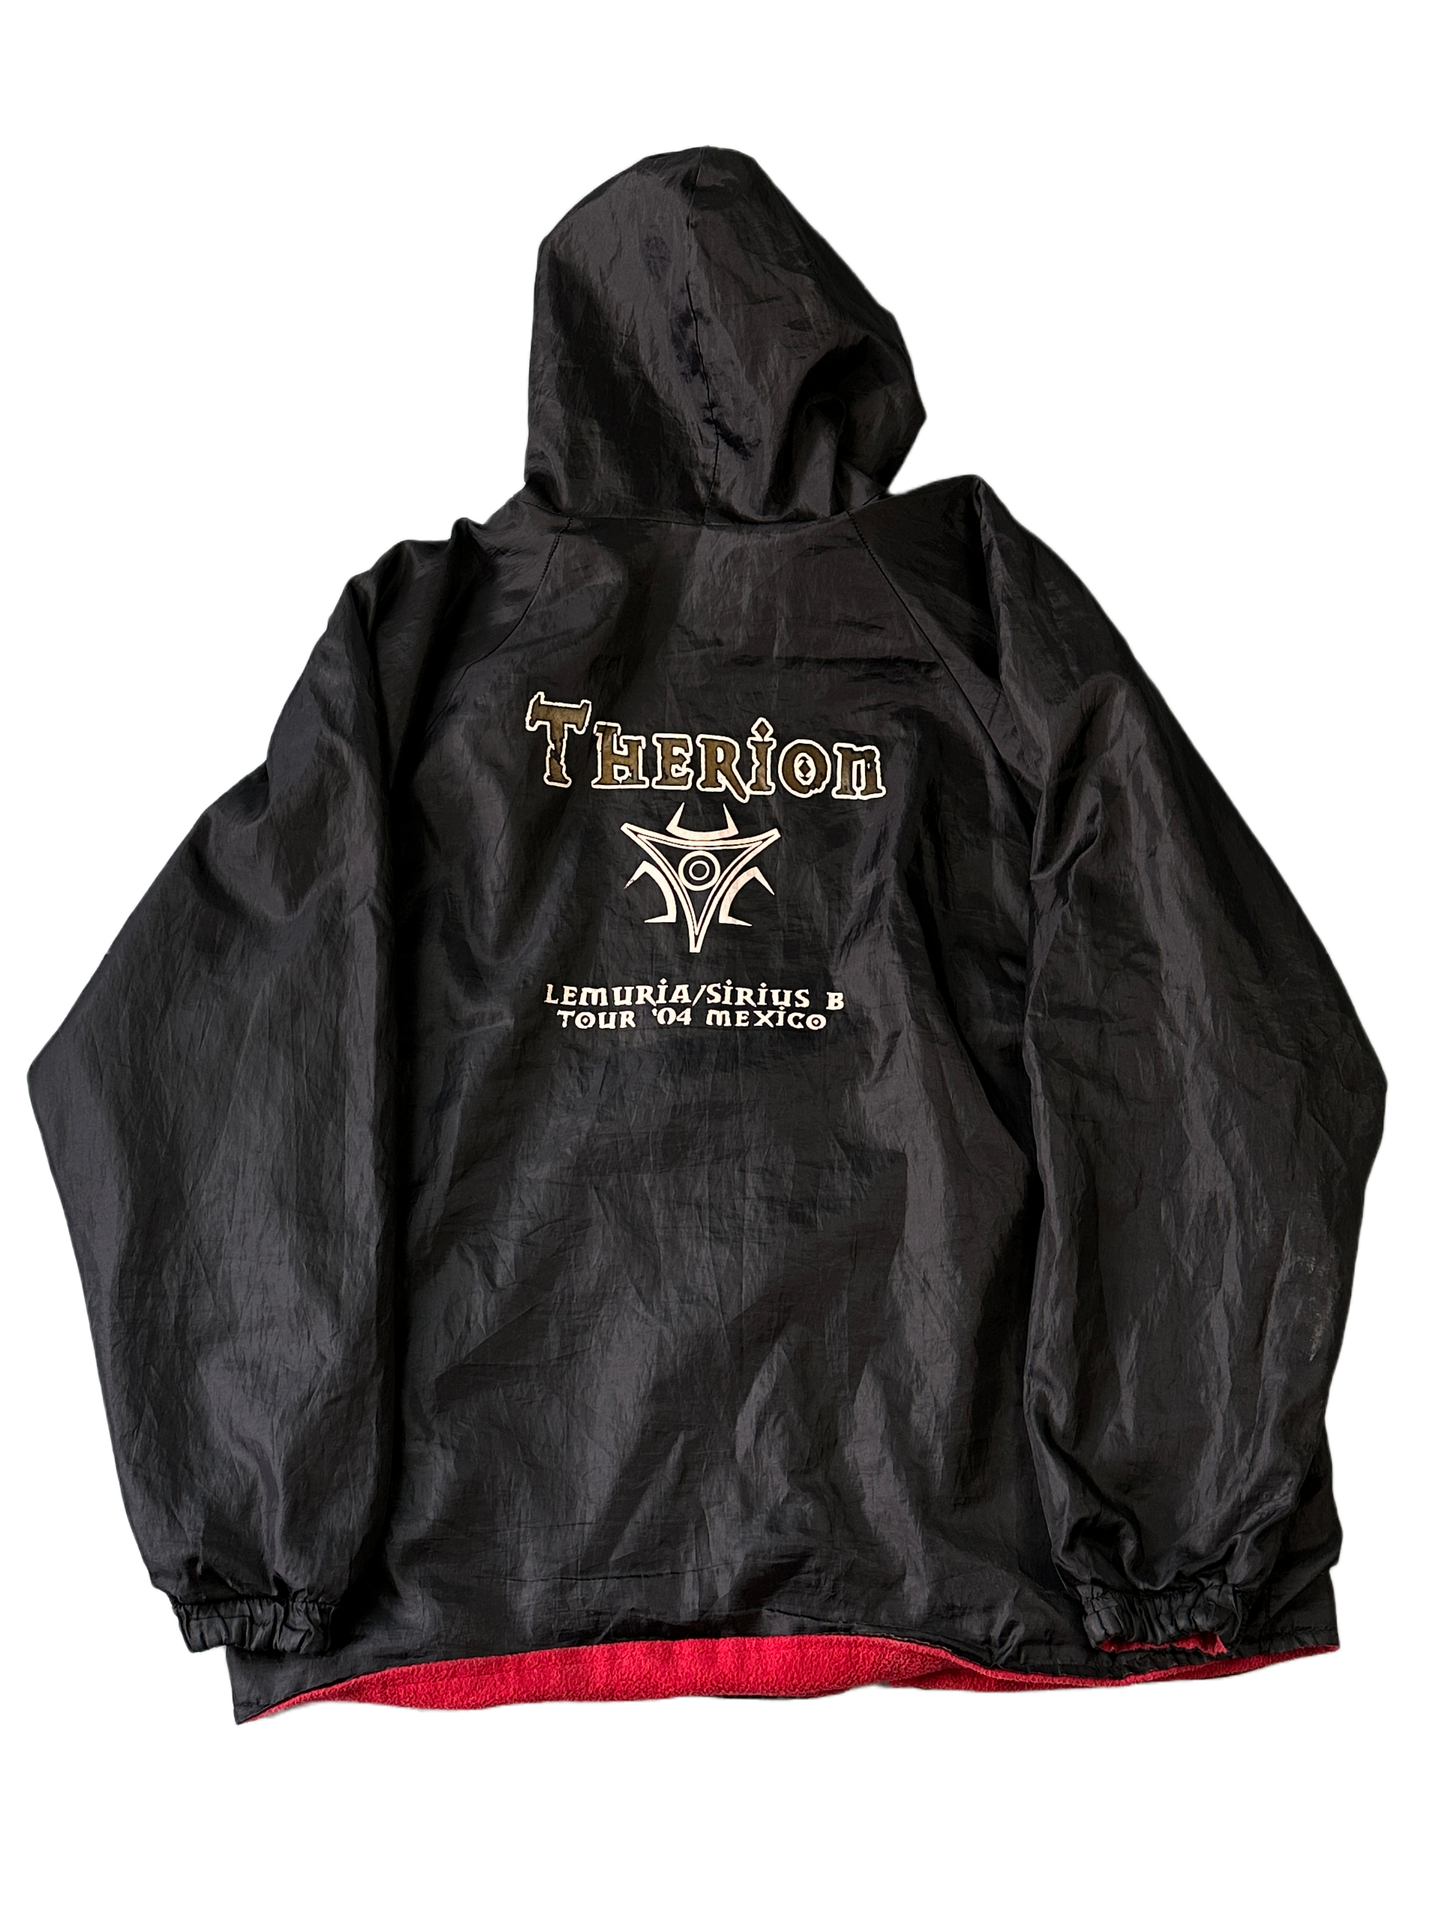 Therion Mexico 2004 Windbreaker - XL